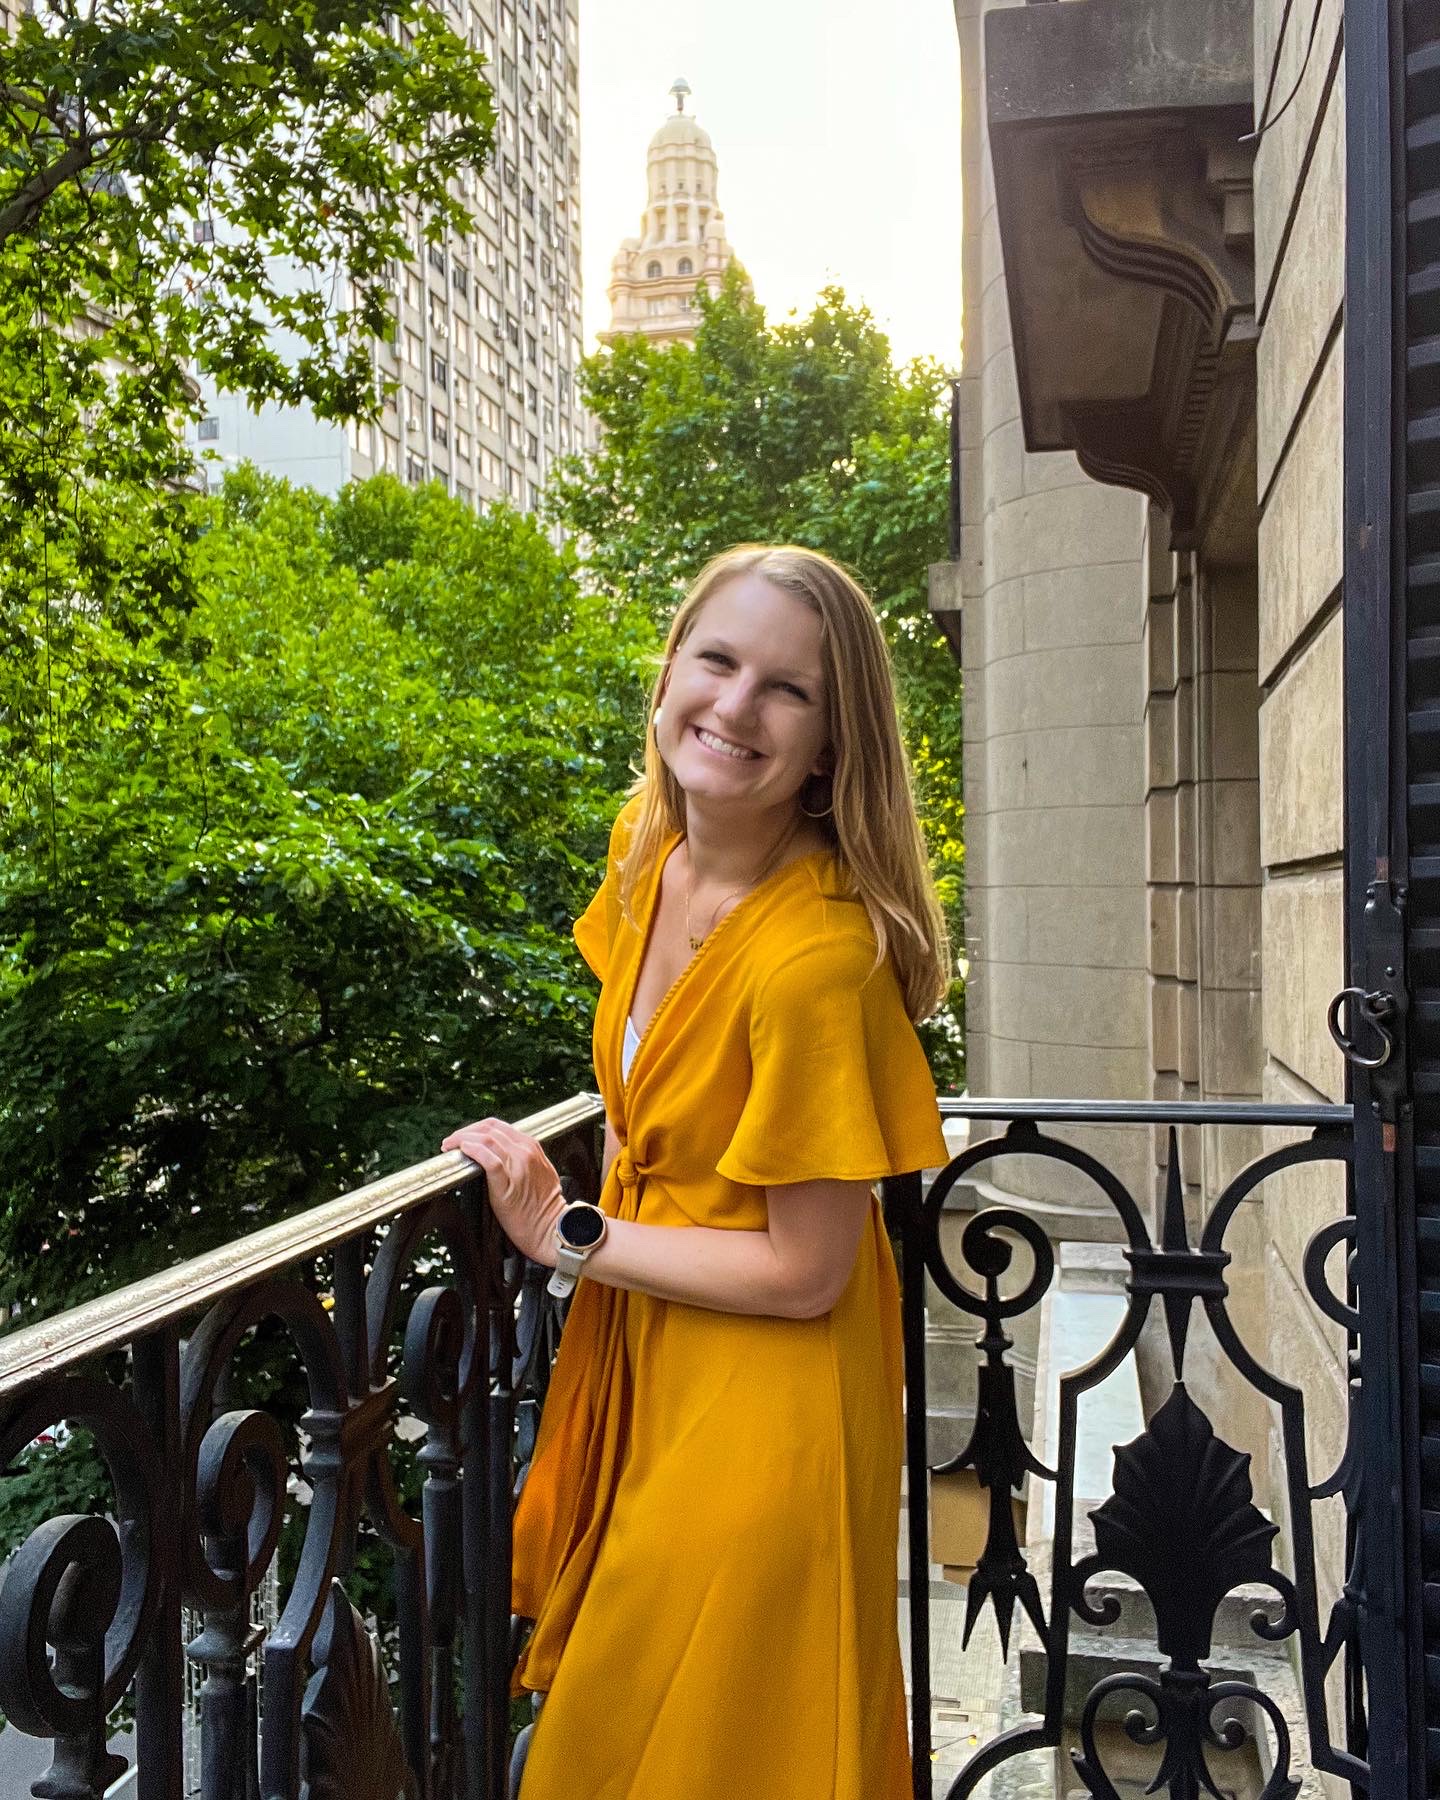 Stephanie (the author of this blog) is wearing a mid-length yellow dress and standing on a balcony. She is smiling at the camera. In the background are trees.